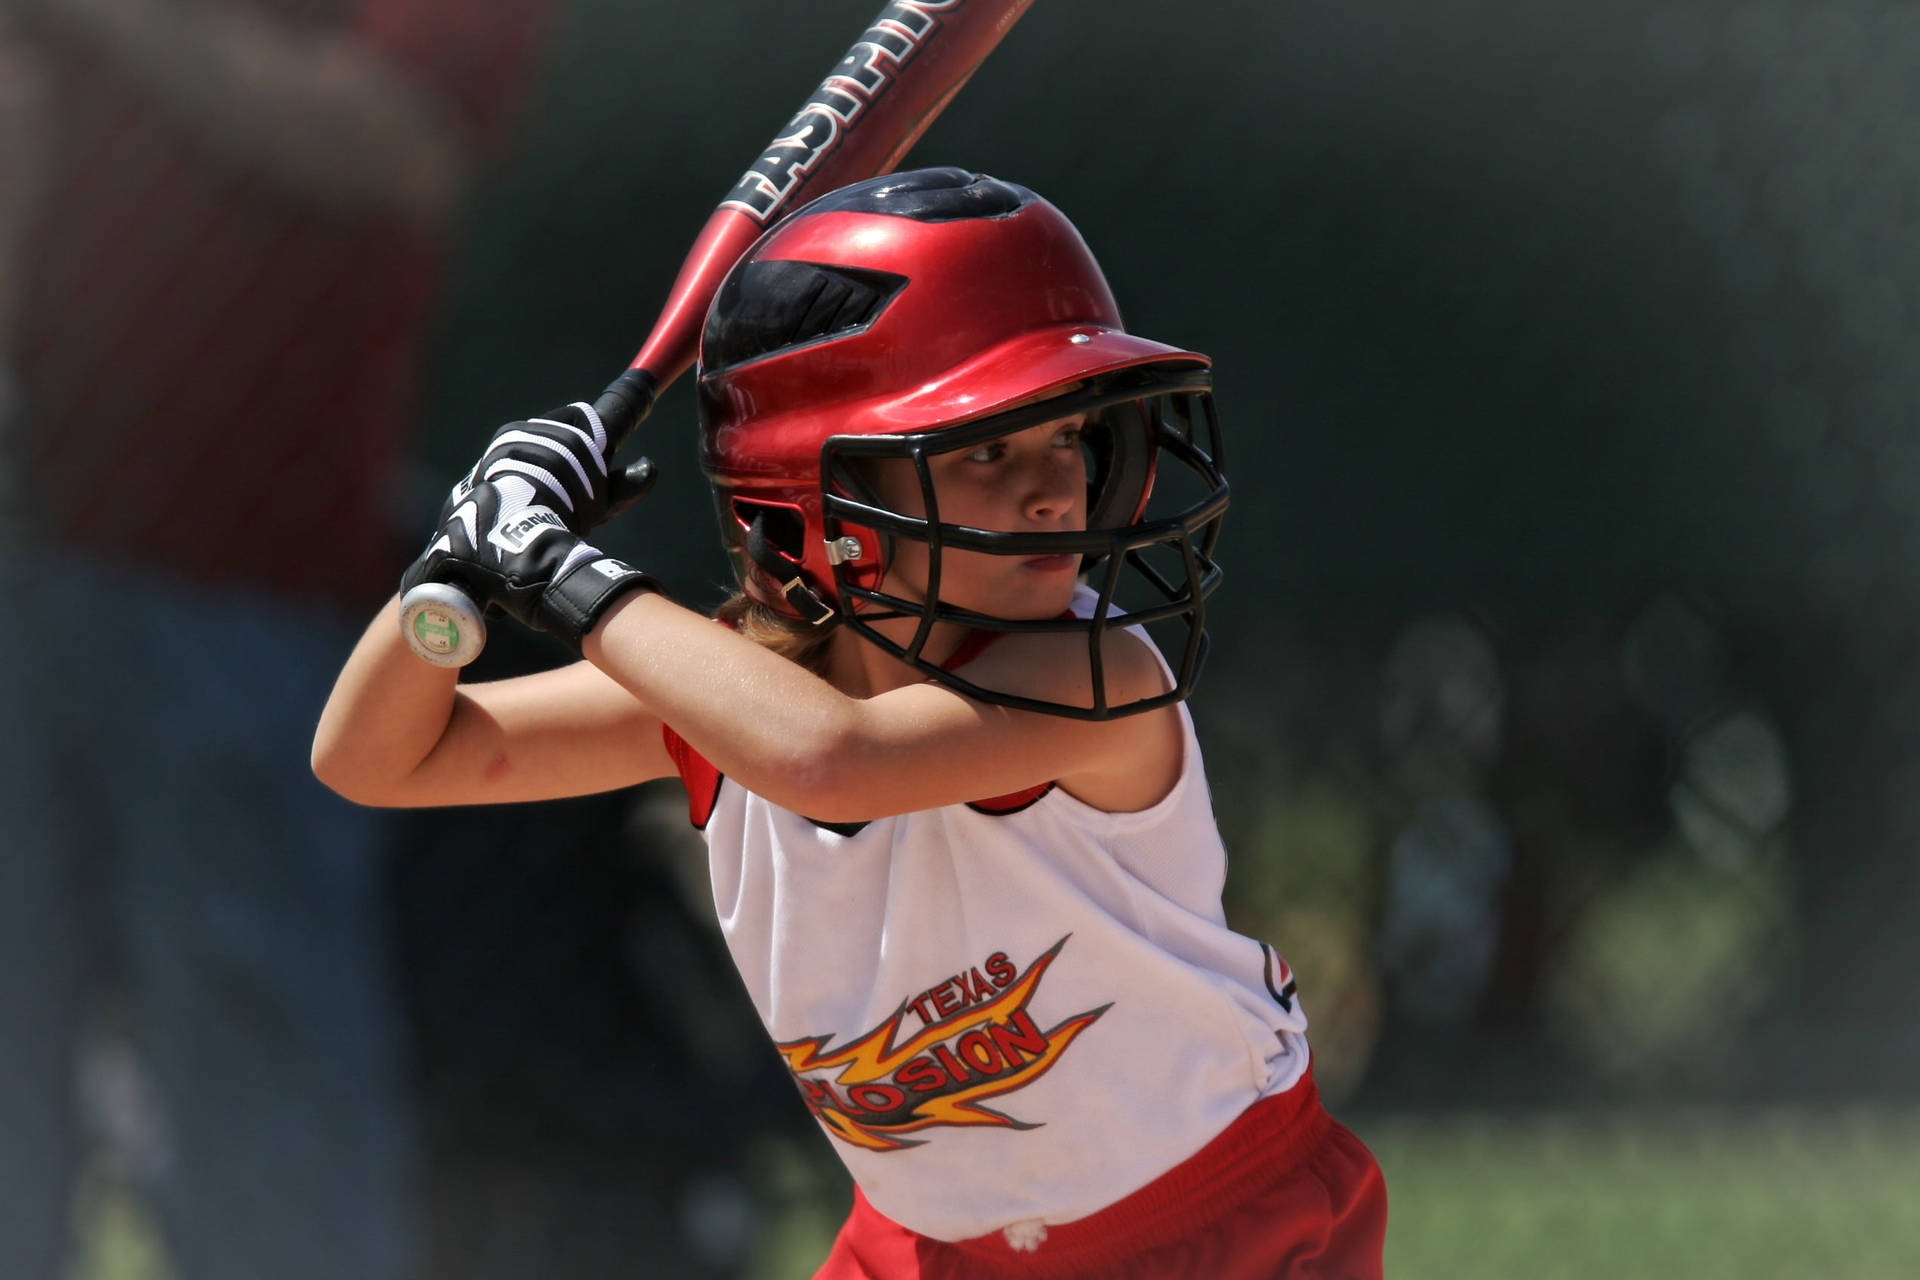 Softball 2544X1696 Wallpaper and Background Image